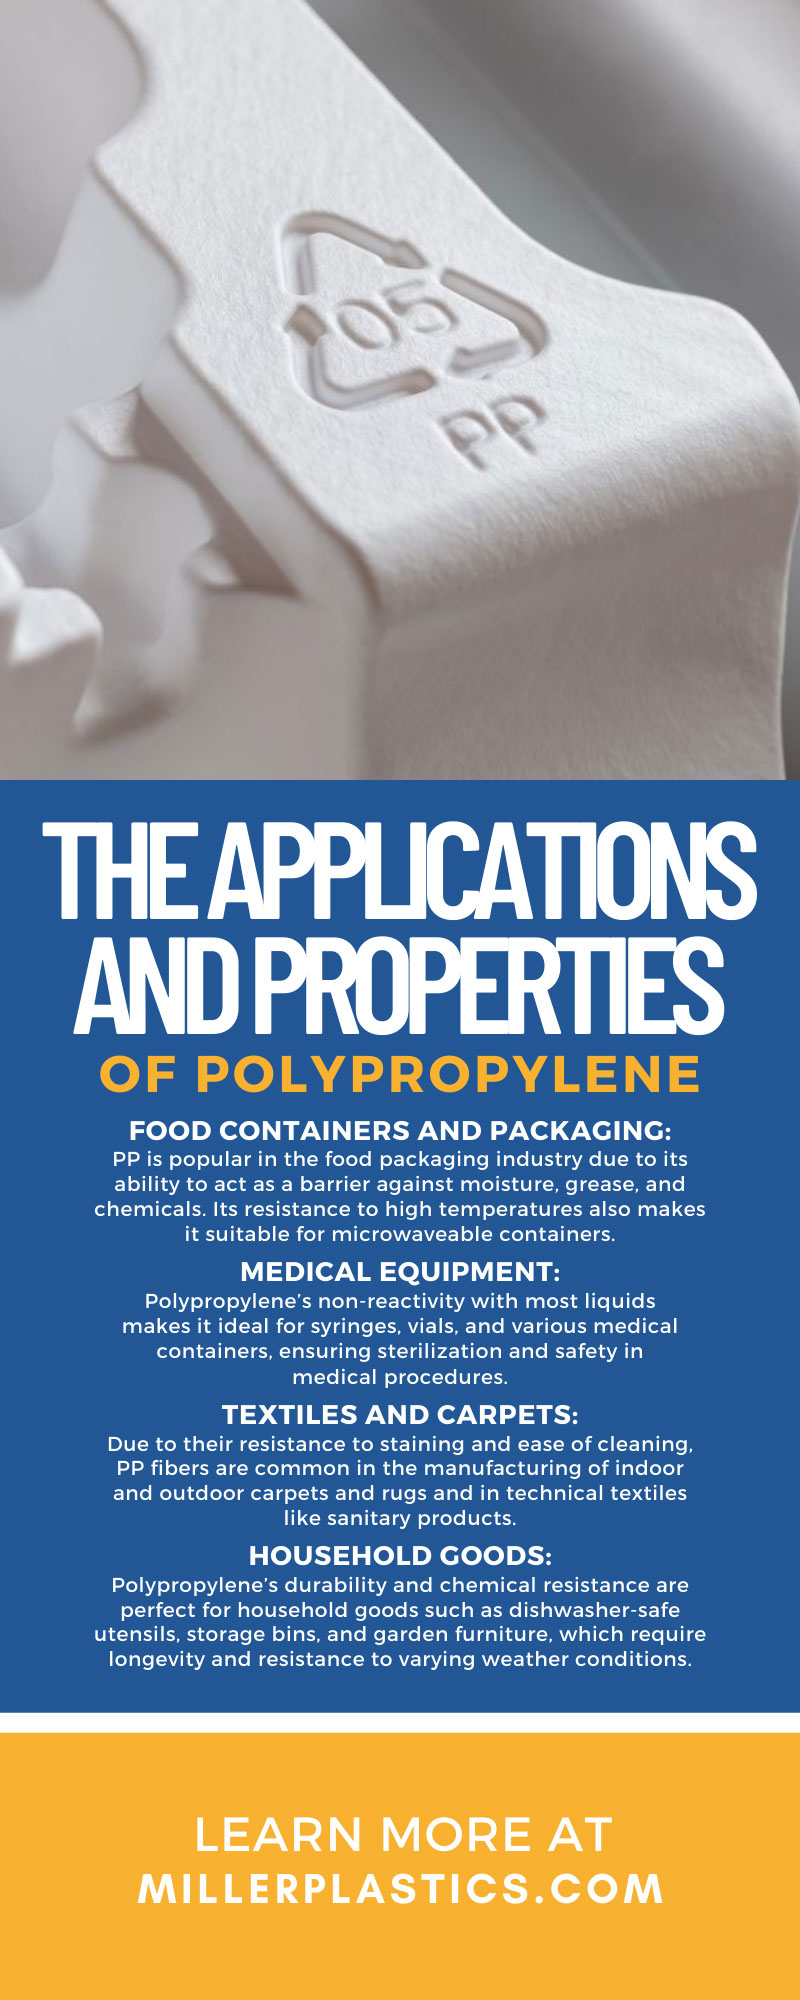 The Applications and Properties of Polypropylene